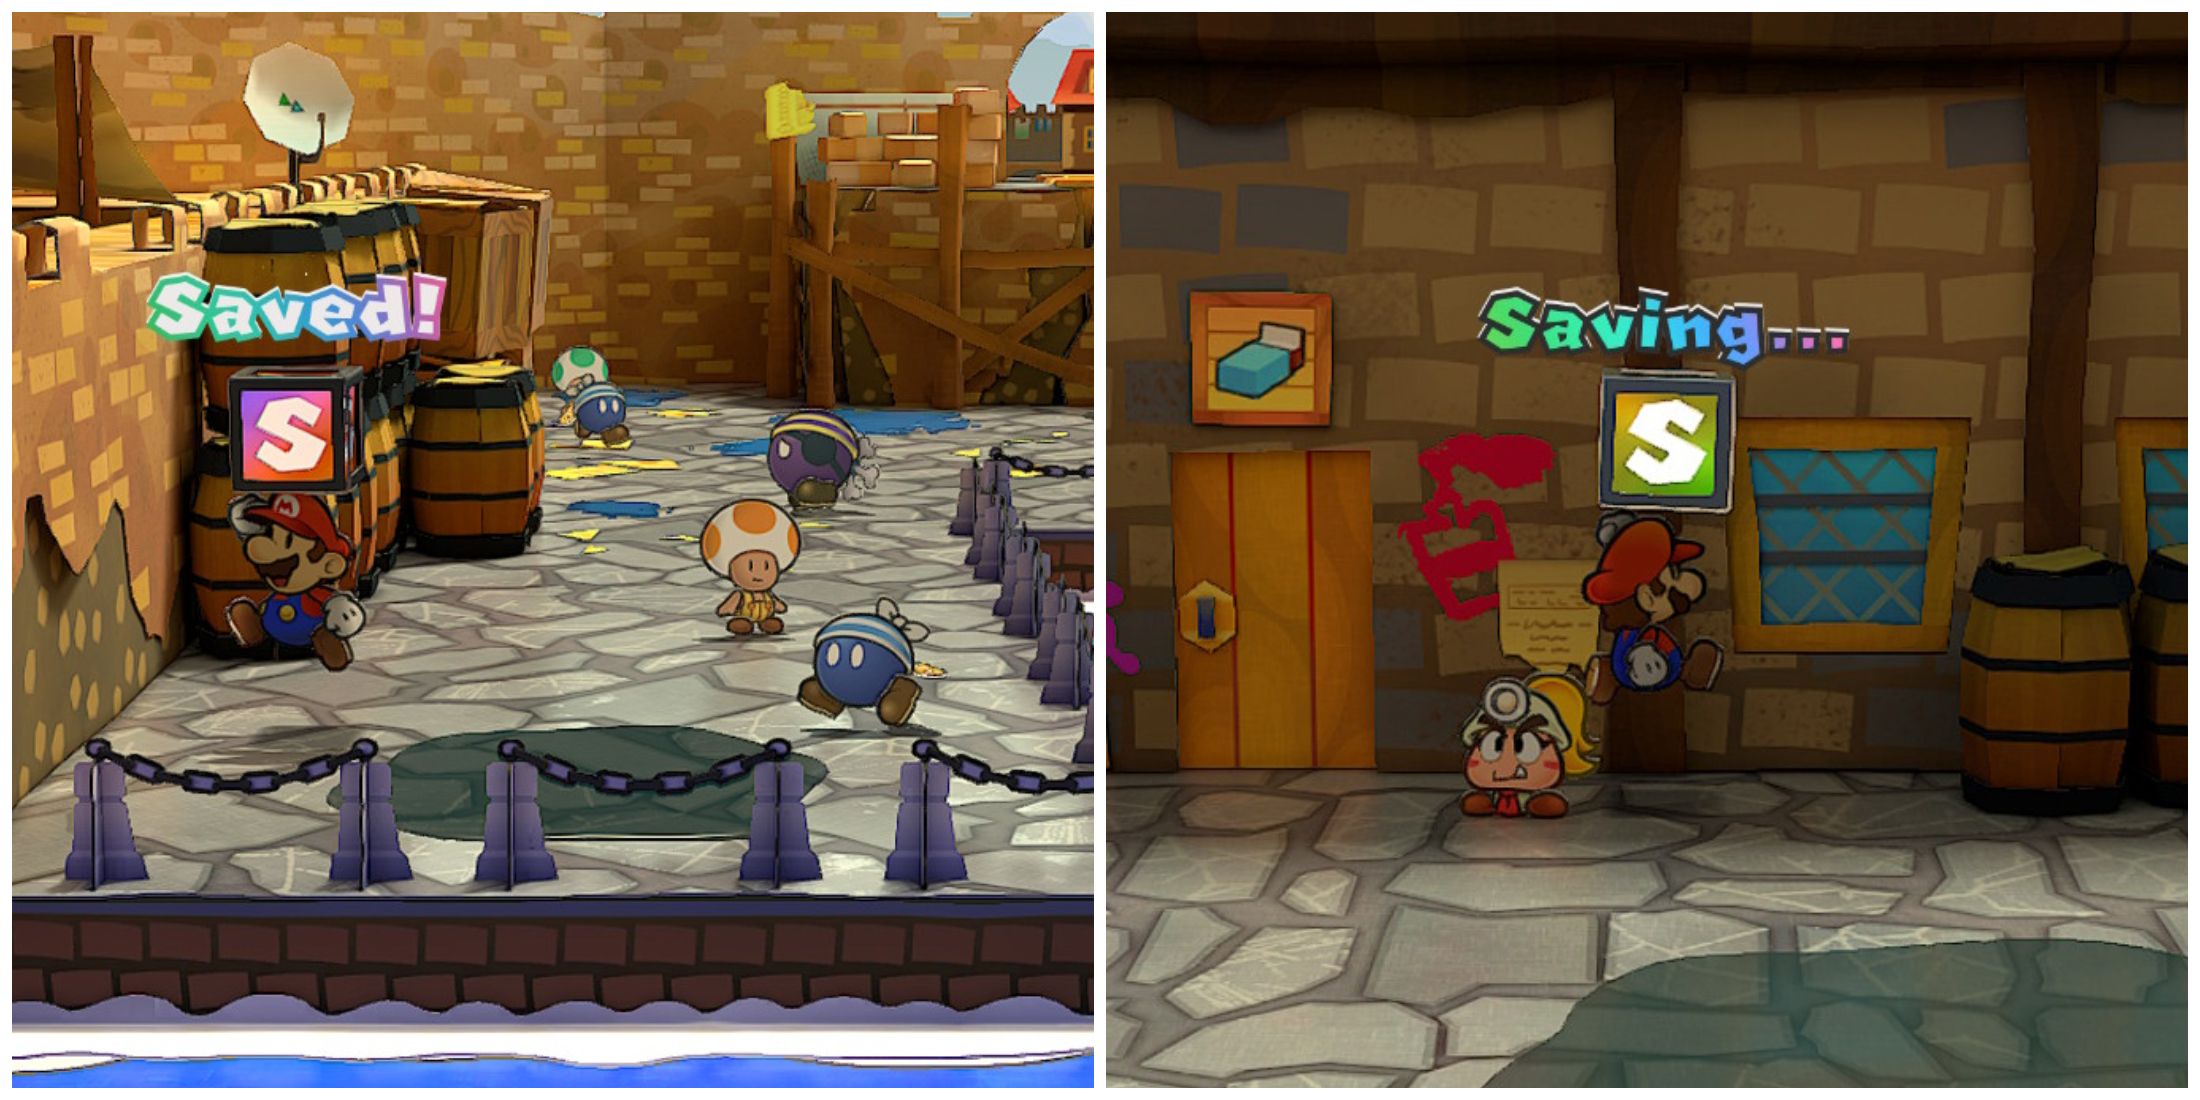 Split image of Mario saving at a save block at the entrance of Rogueport and within Rogueport in Paper Mario The Thousand Year Door